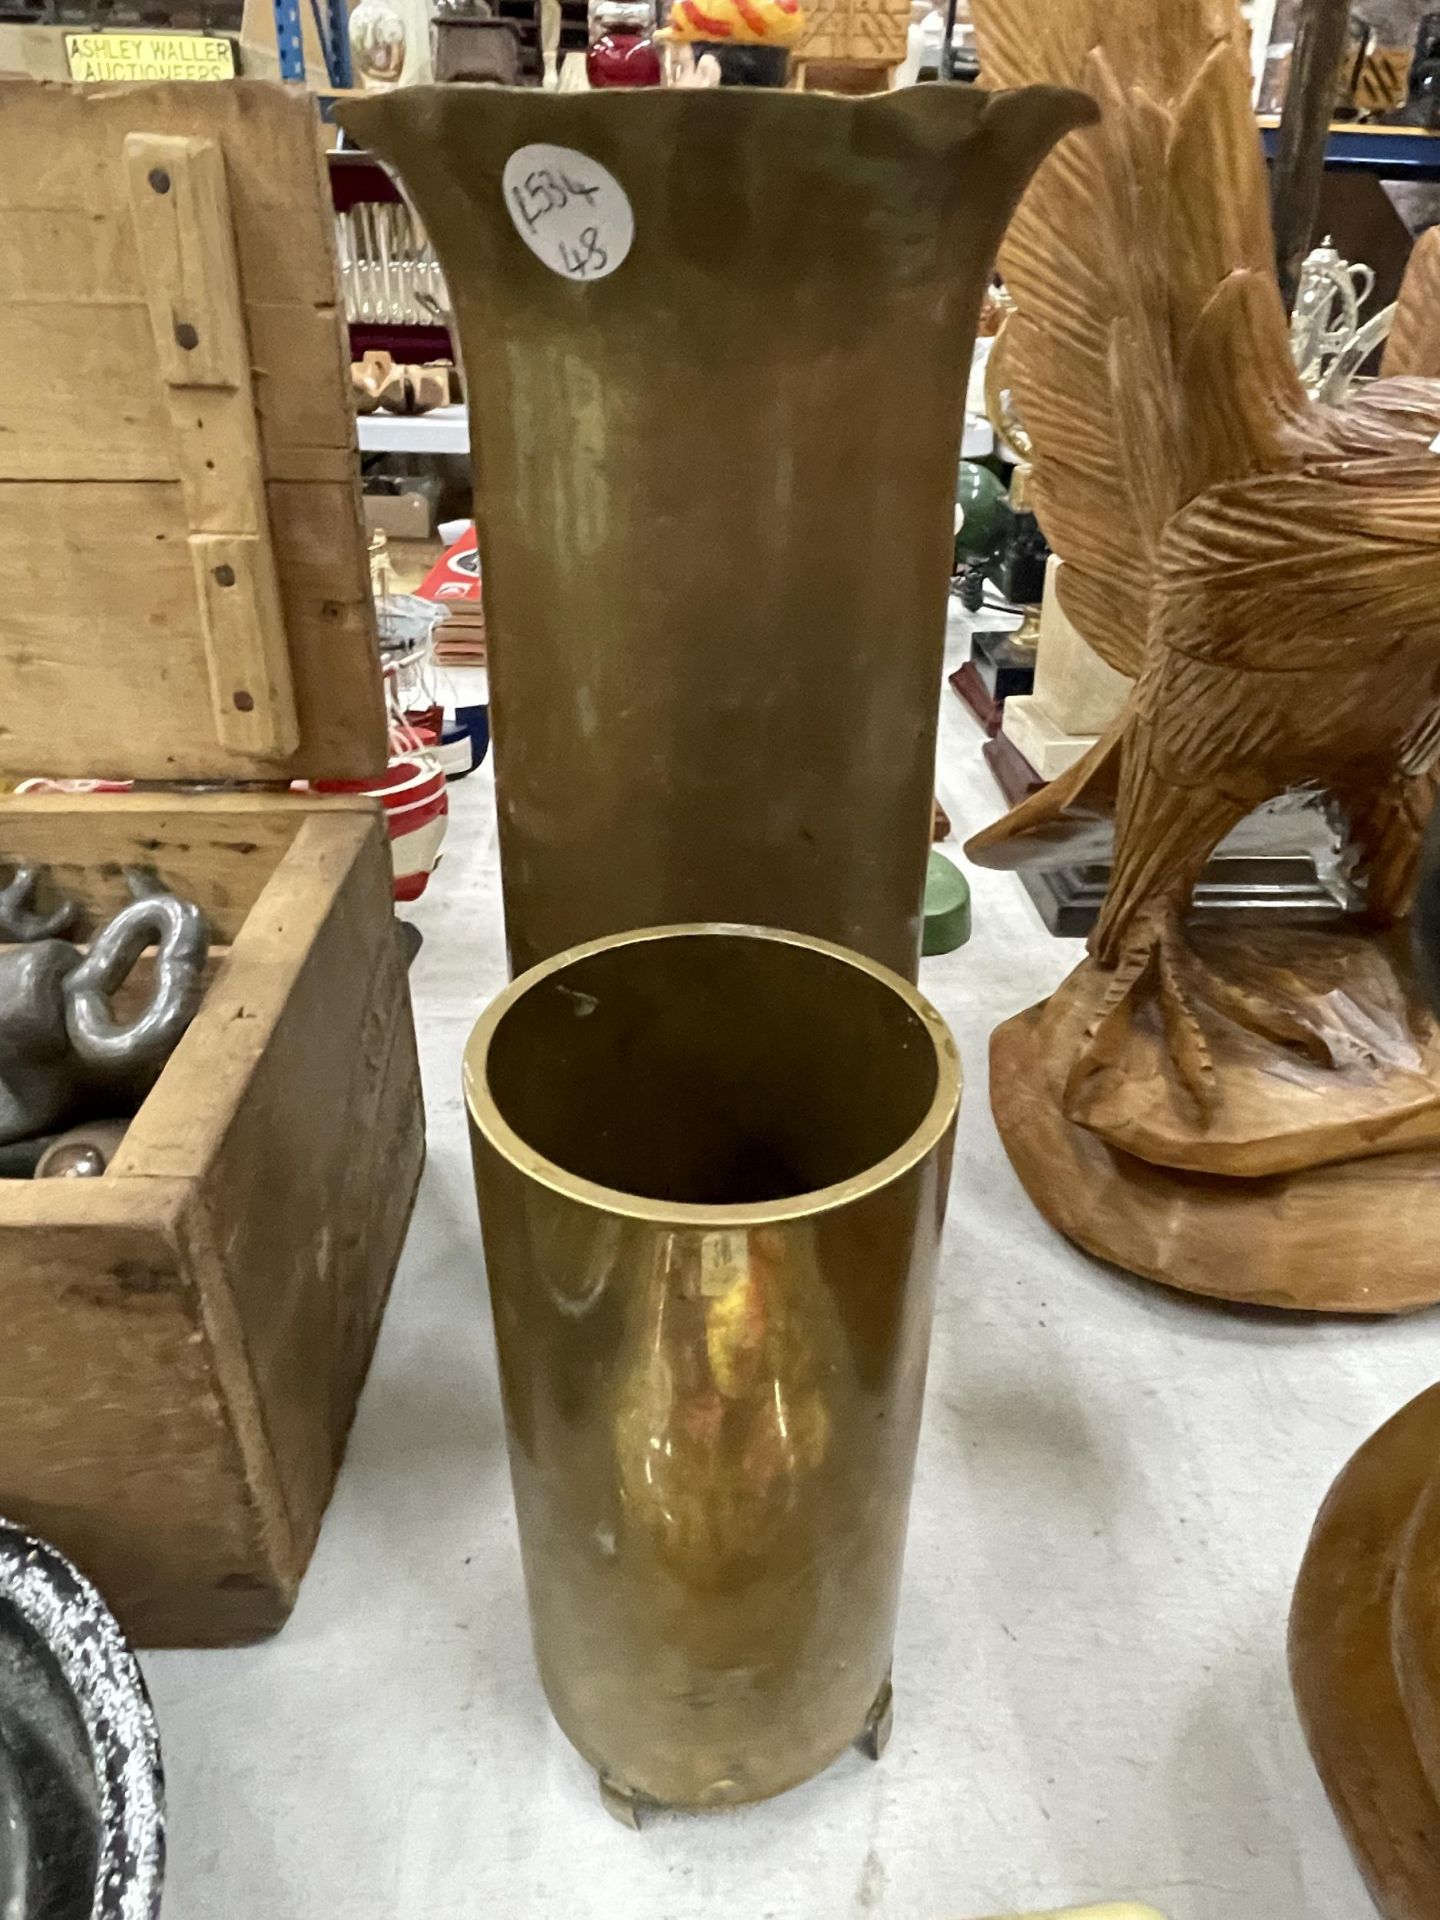 TWO BRASS TRECH ART SHELL VASES, HEIGHTS 25CM AND 14CM